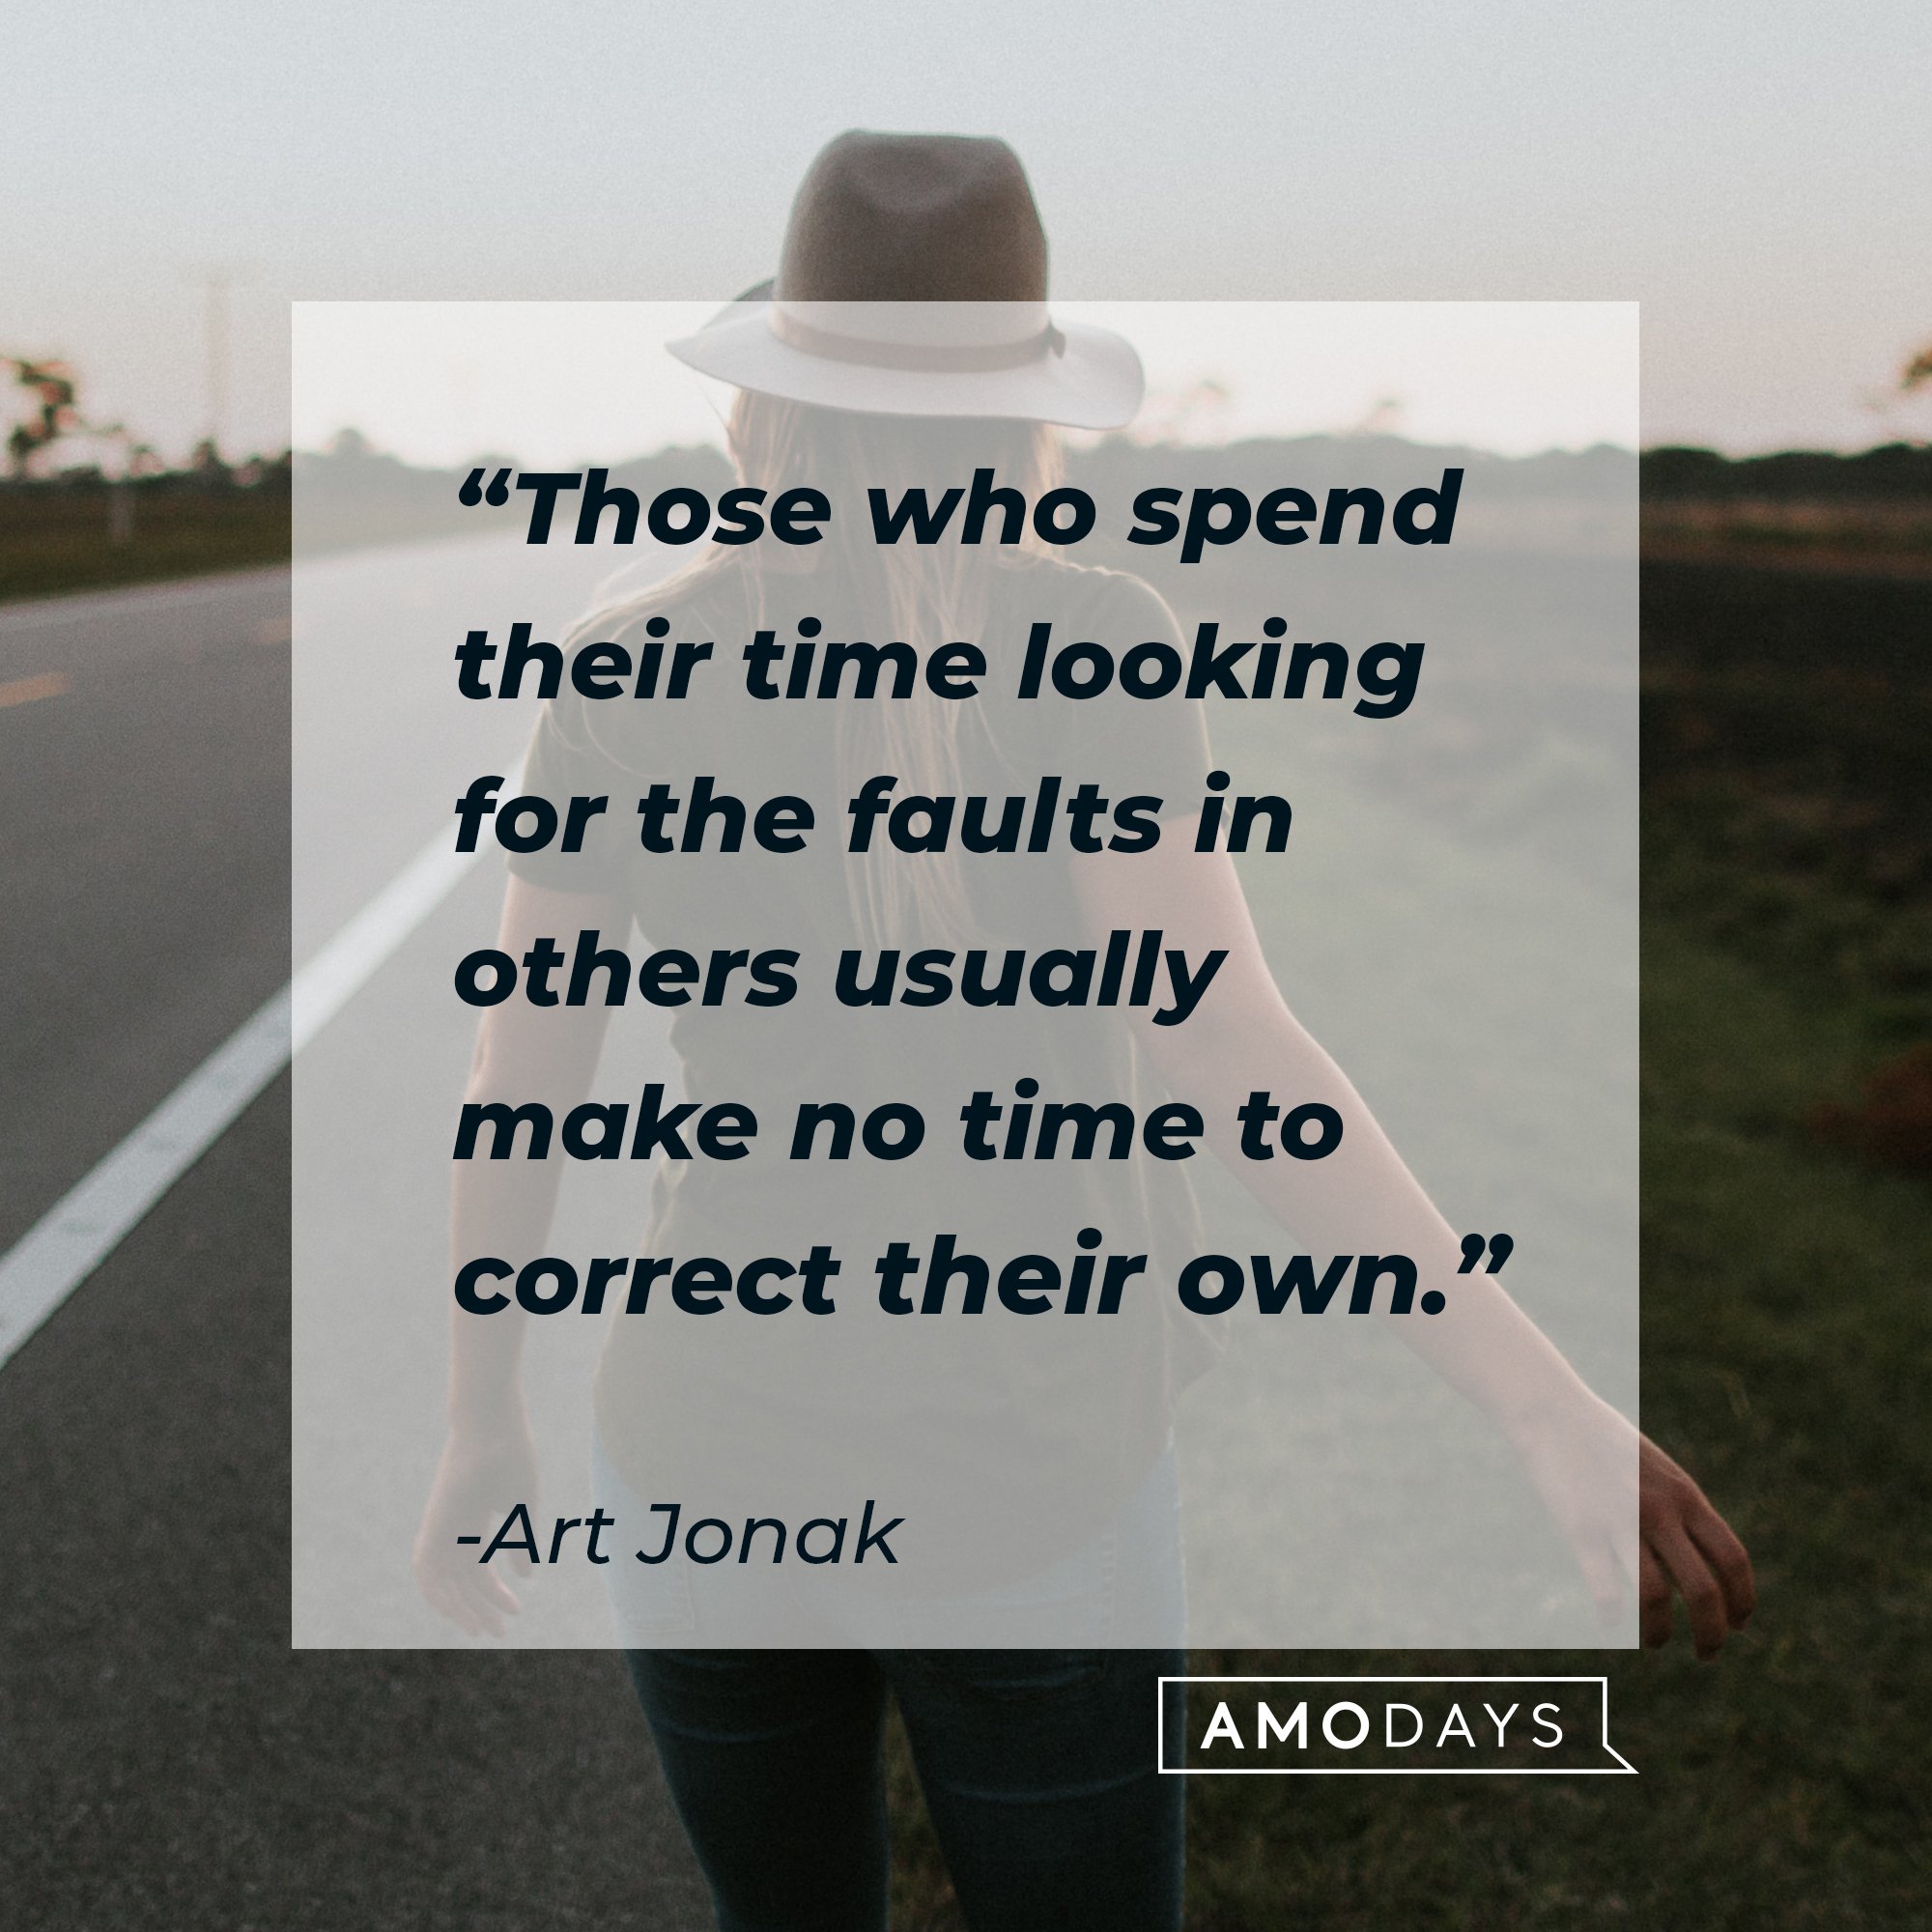 Art Jonak's quote: "Those who spend their time looking for the faults in others usually make no time to correct their own." | Image: AmoDays